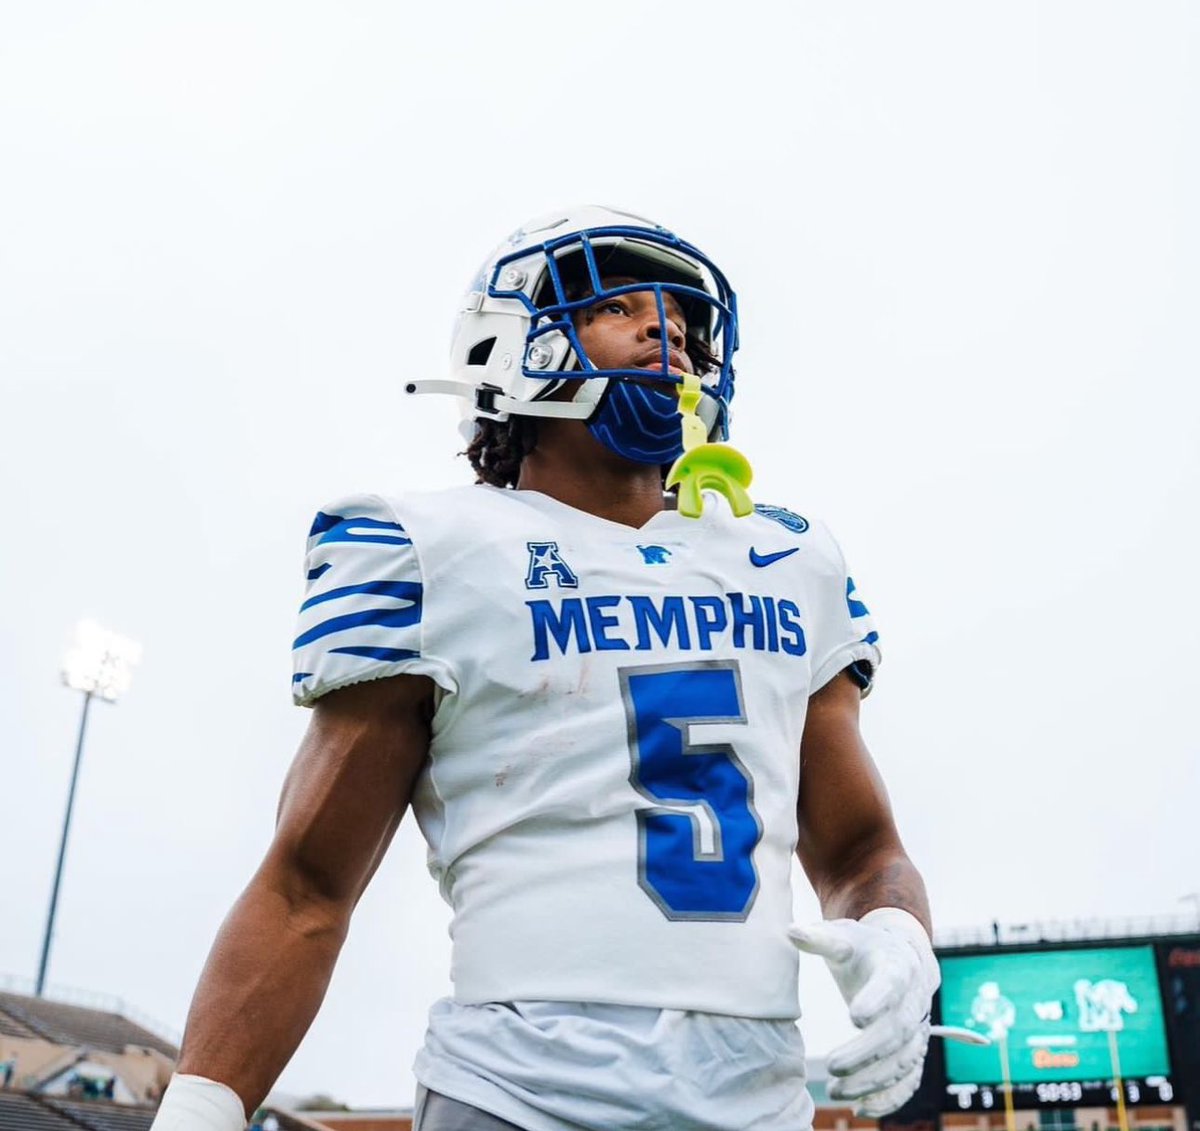 Blessed and Thankful for my teammates, coaches and family for helping me earn an offer to The University of Memphis #AGTG #GoTigers @CoachLeeMarks @koachamey @coachdixon54 @coach_qbtf @CoachMac38